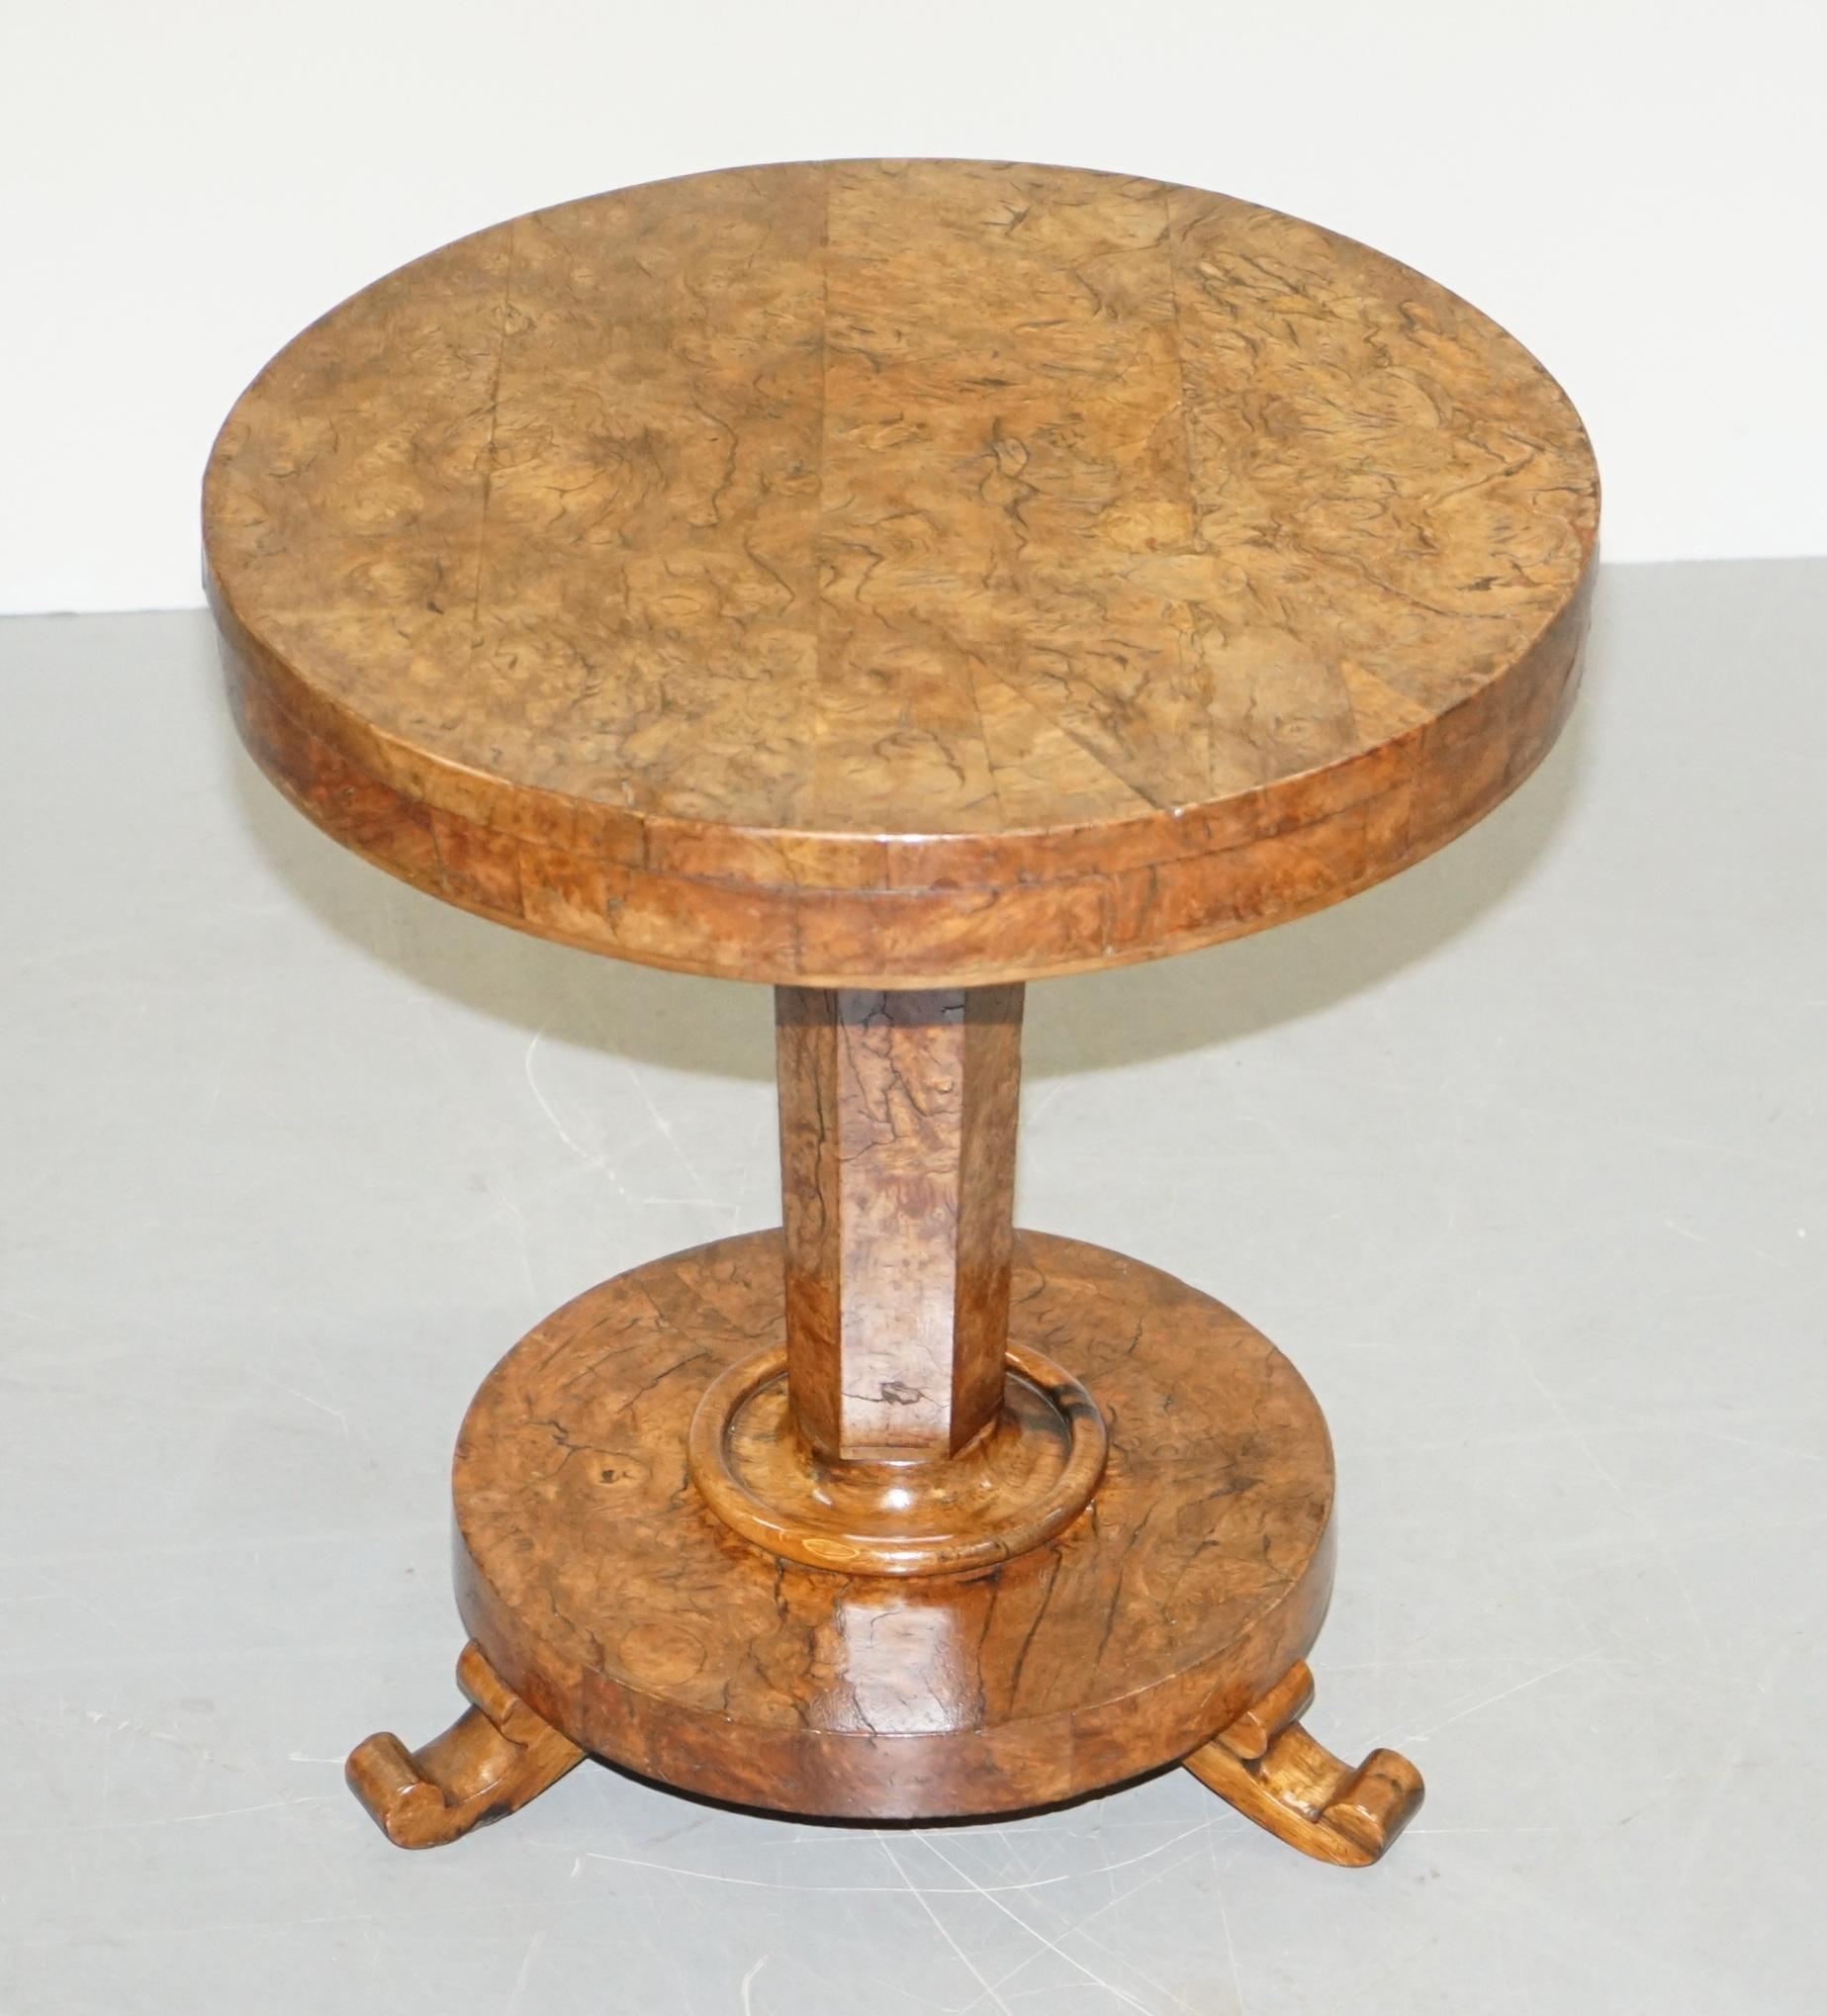 We are delighted to offer for sale this lovely original Victorian Pollard oak side end lamp wine table with the most sublime patina I have ever seen!

What a table!!!! I mean what a table!!!!!!!! This thing is amazing, I absolutely love it, I